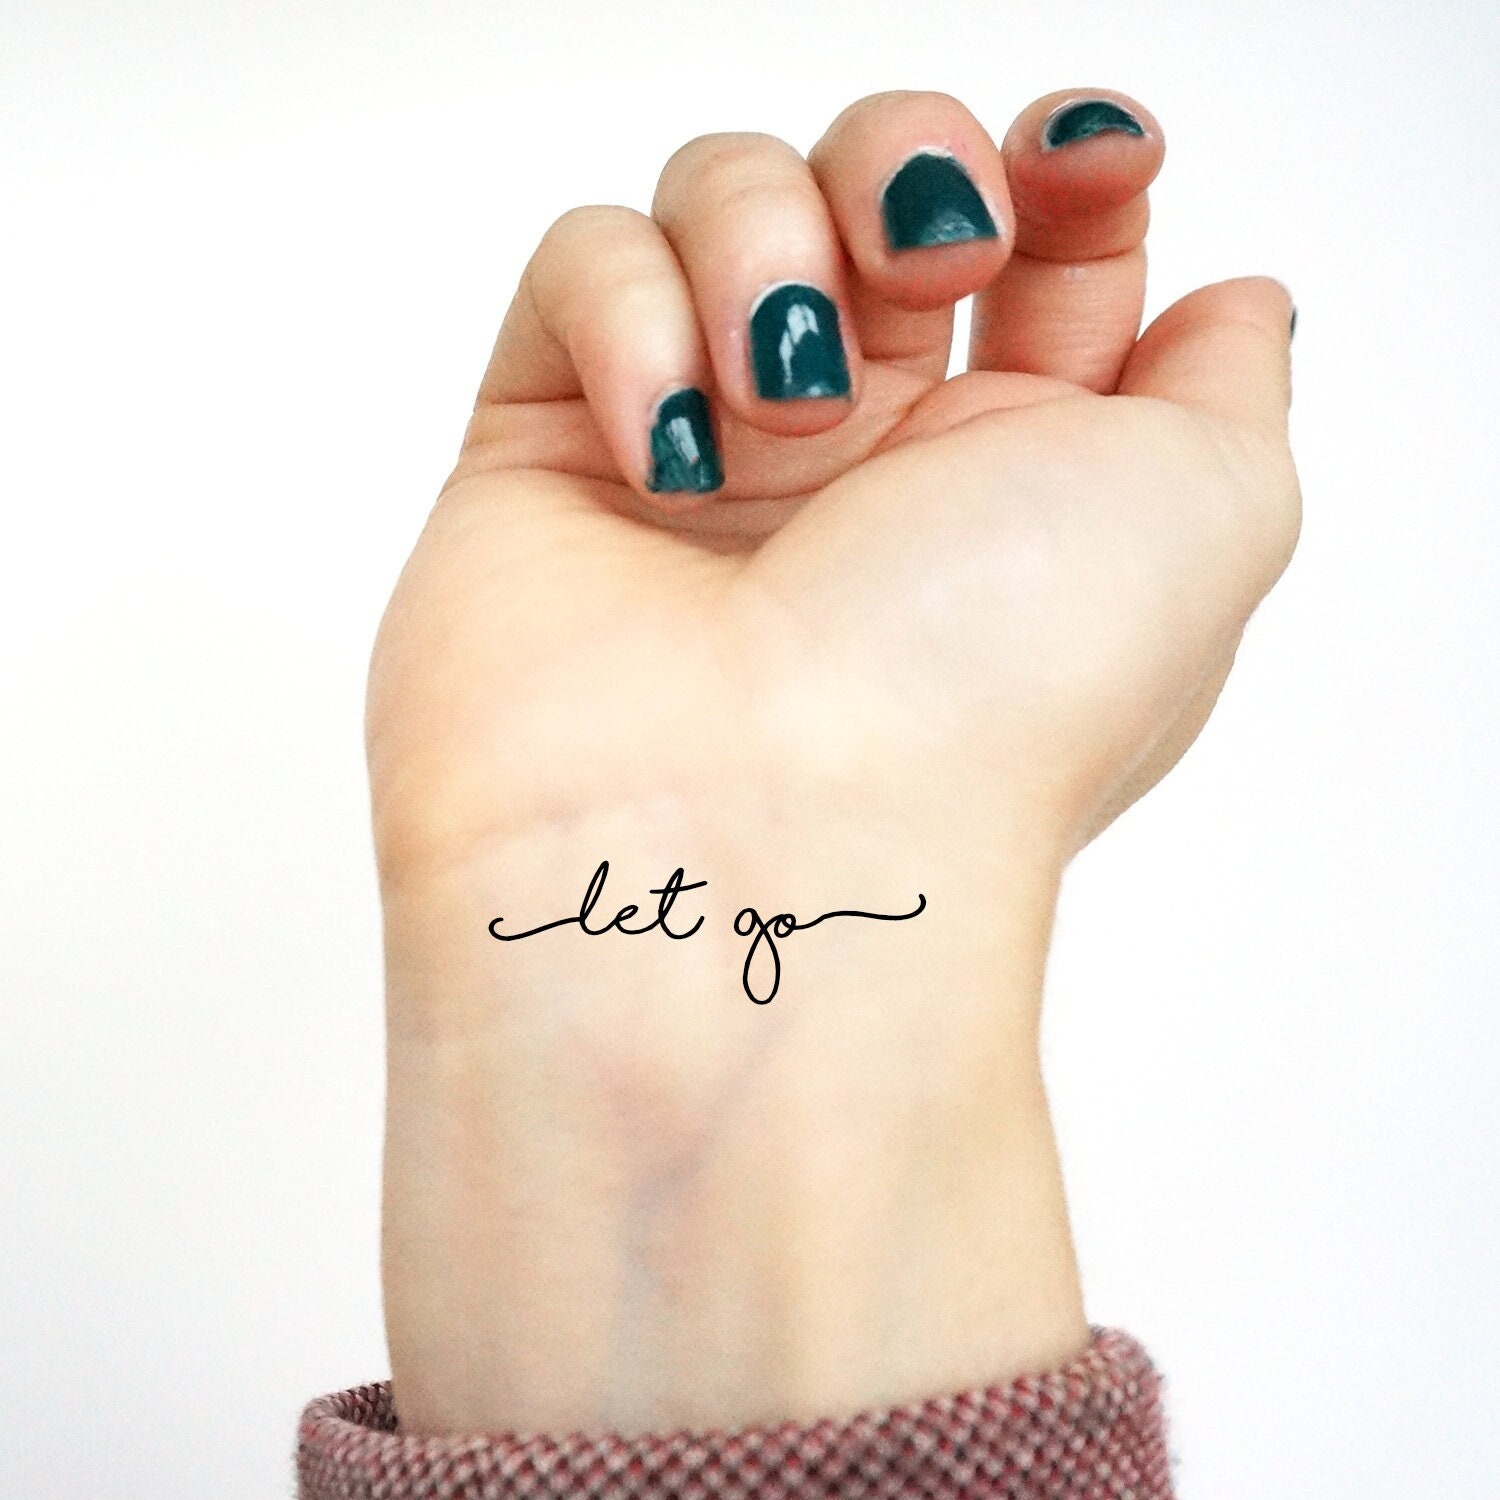 60 Tiny Tattoos You Cant Help But Love  TattooBlend  Tiny wrist tattoos  Tiny tattoos Trendy tattoos